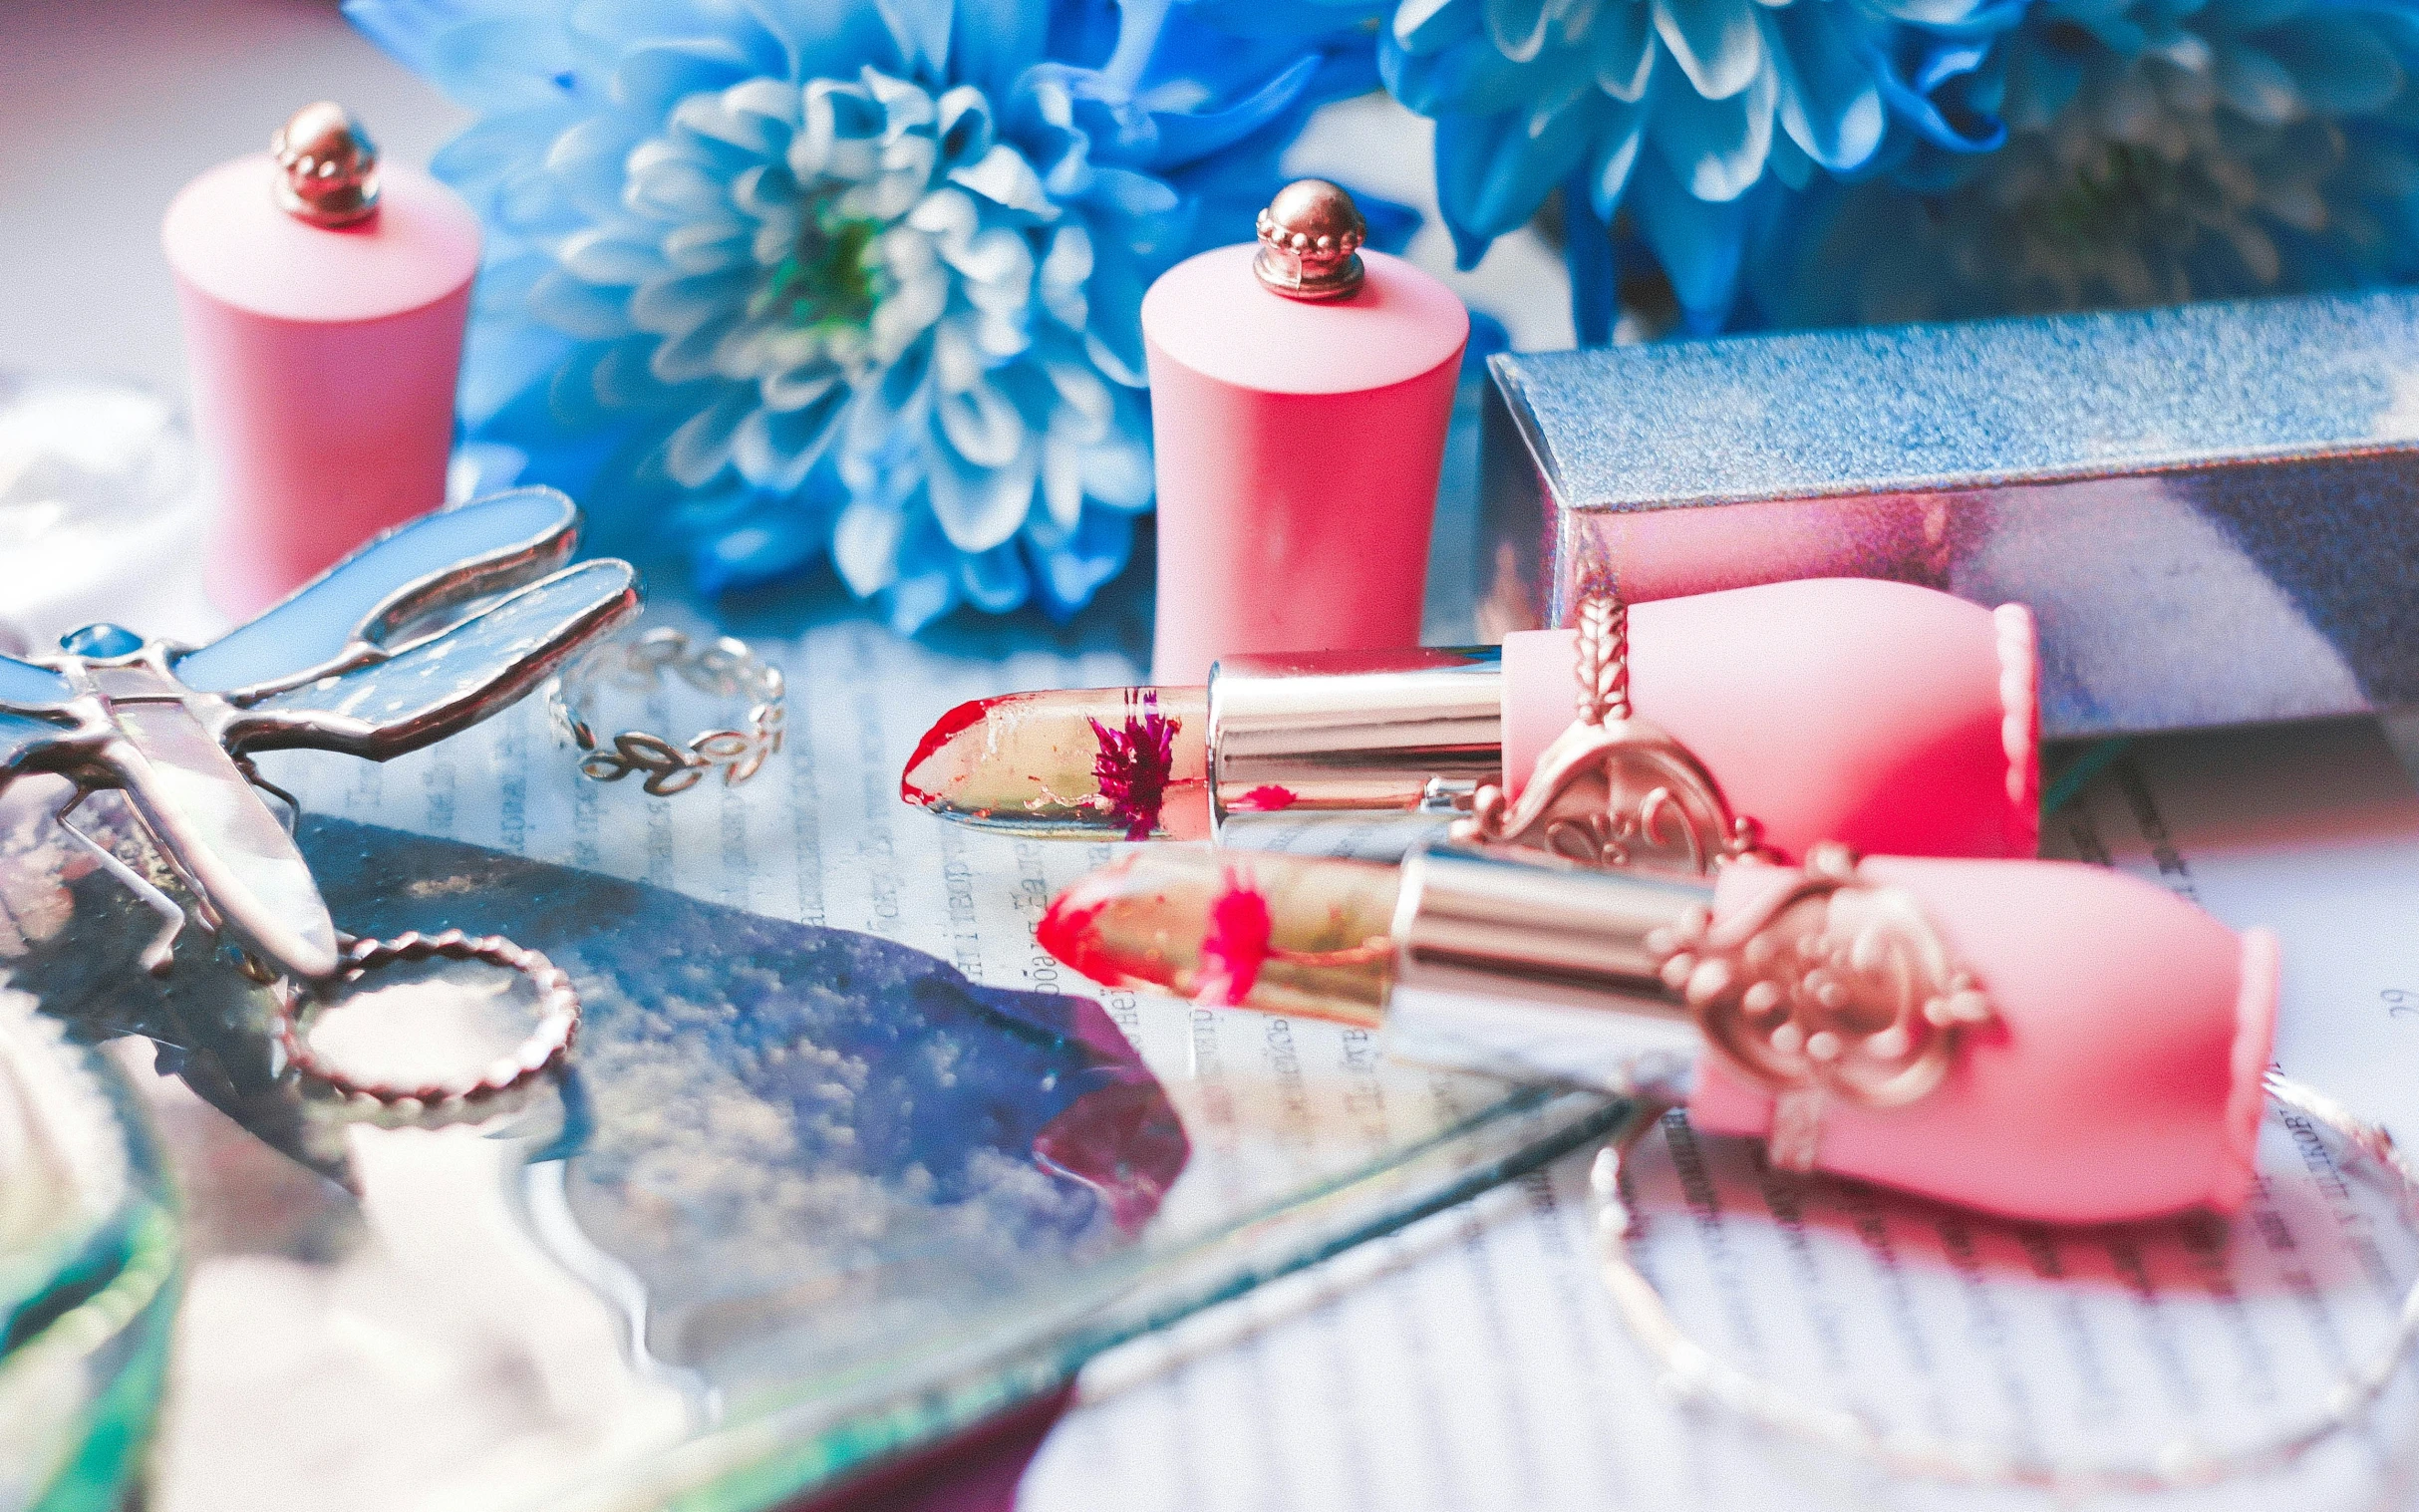 the beauty products on the table have been used for makeup